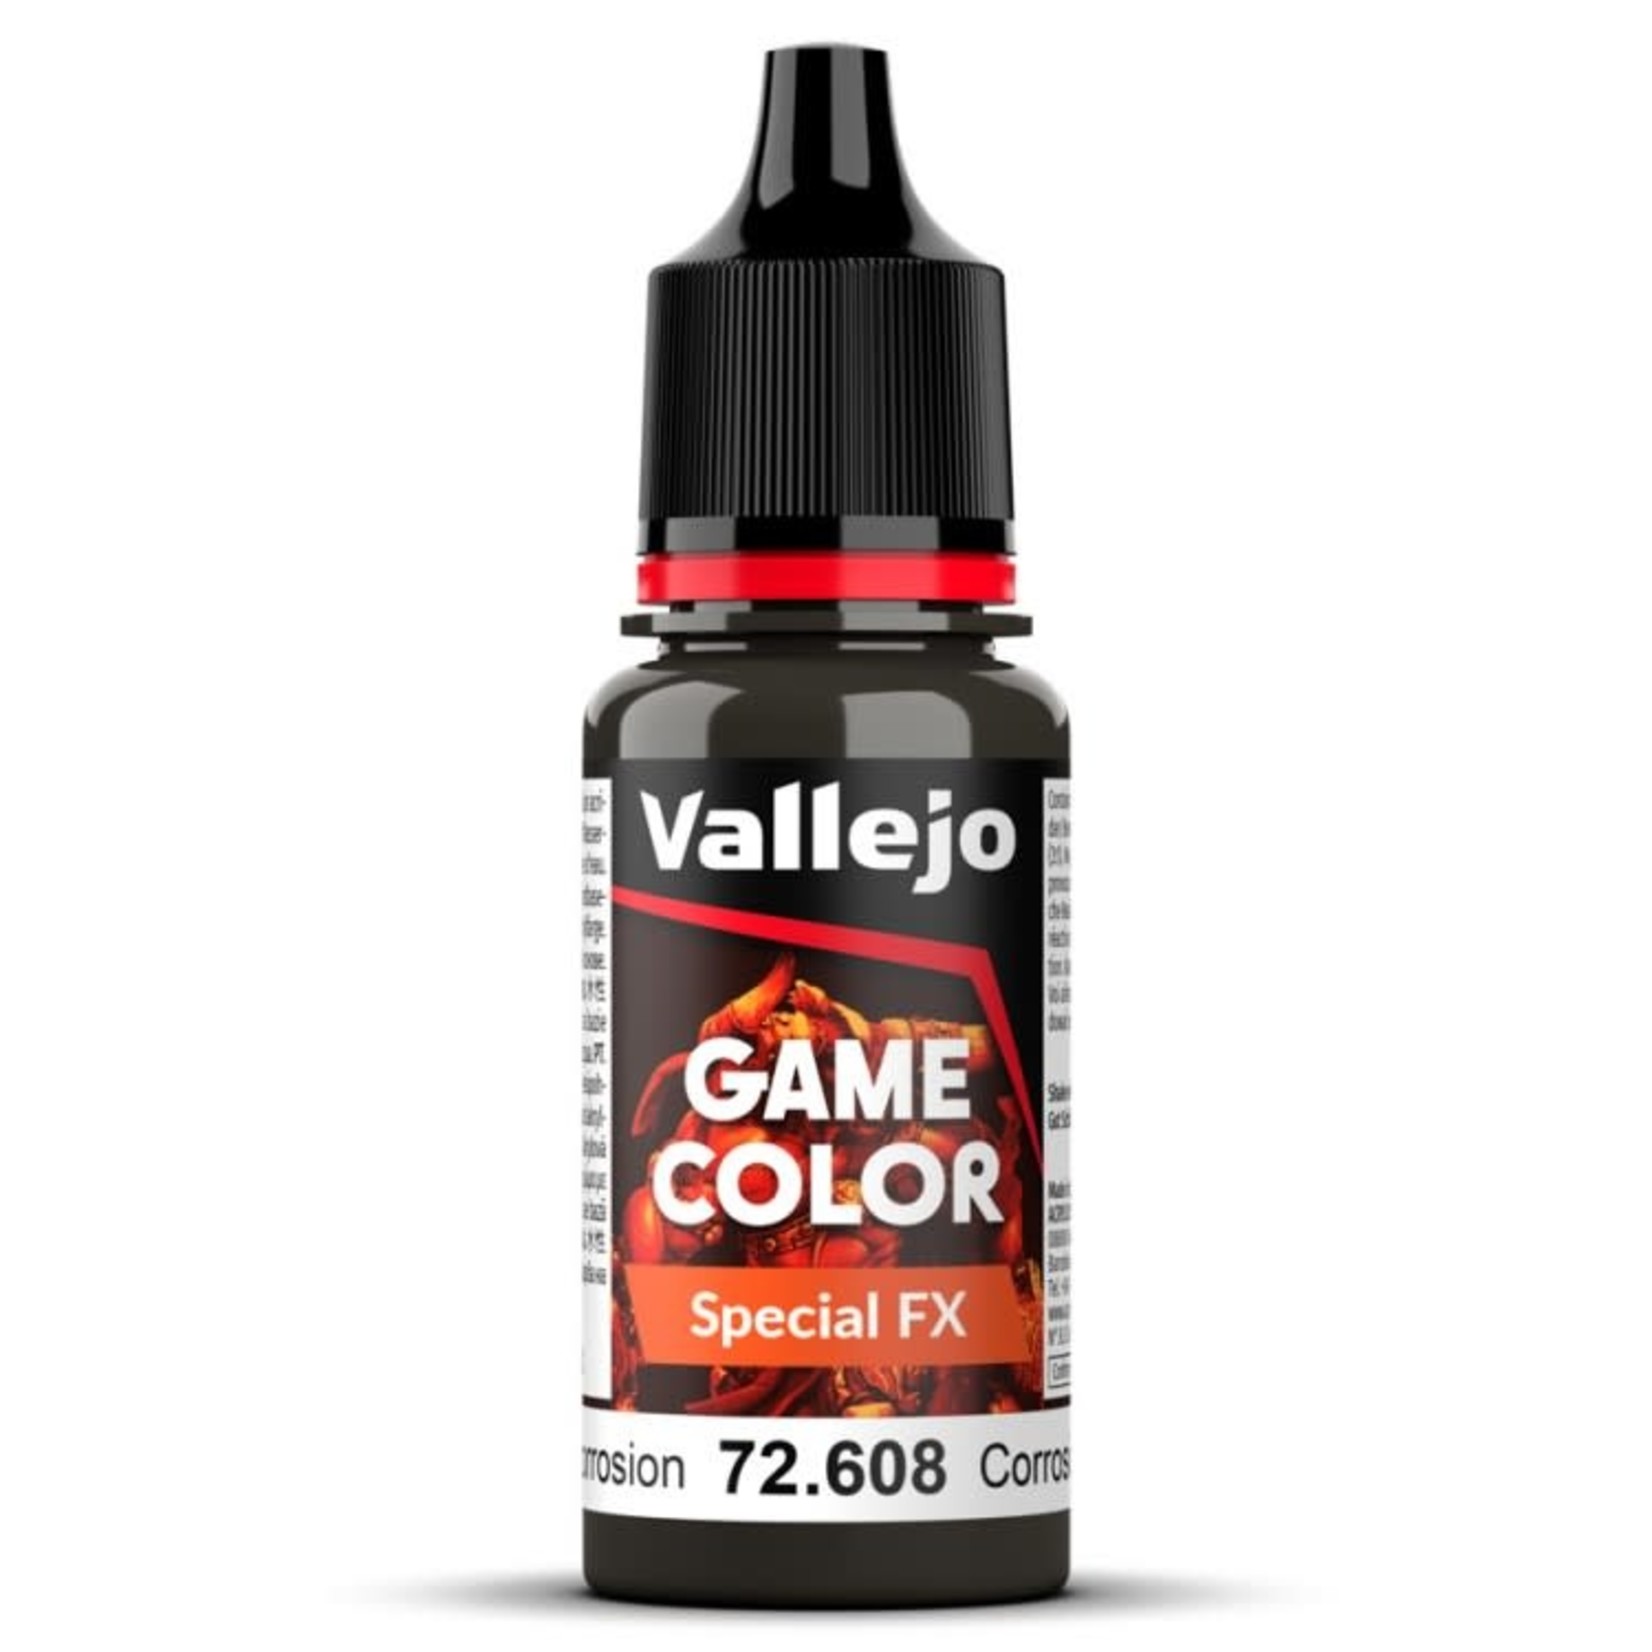 Vallejo Paint: Game Color, Special FX (Corrosion)